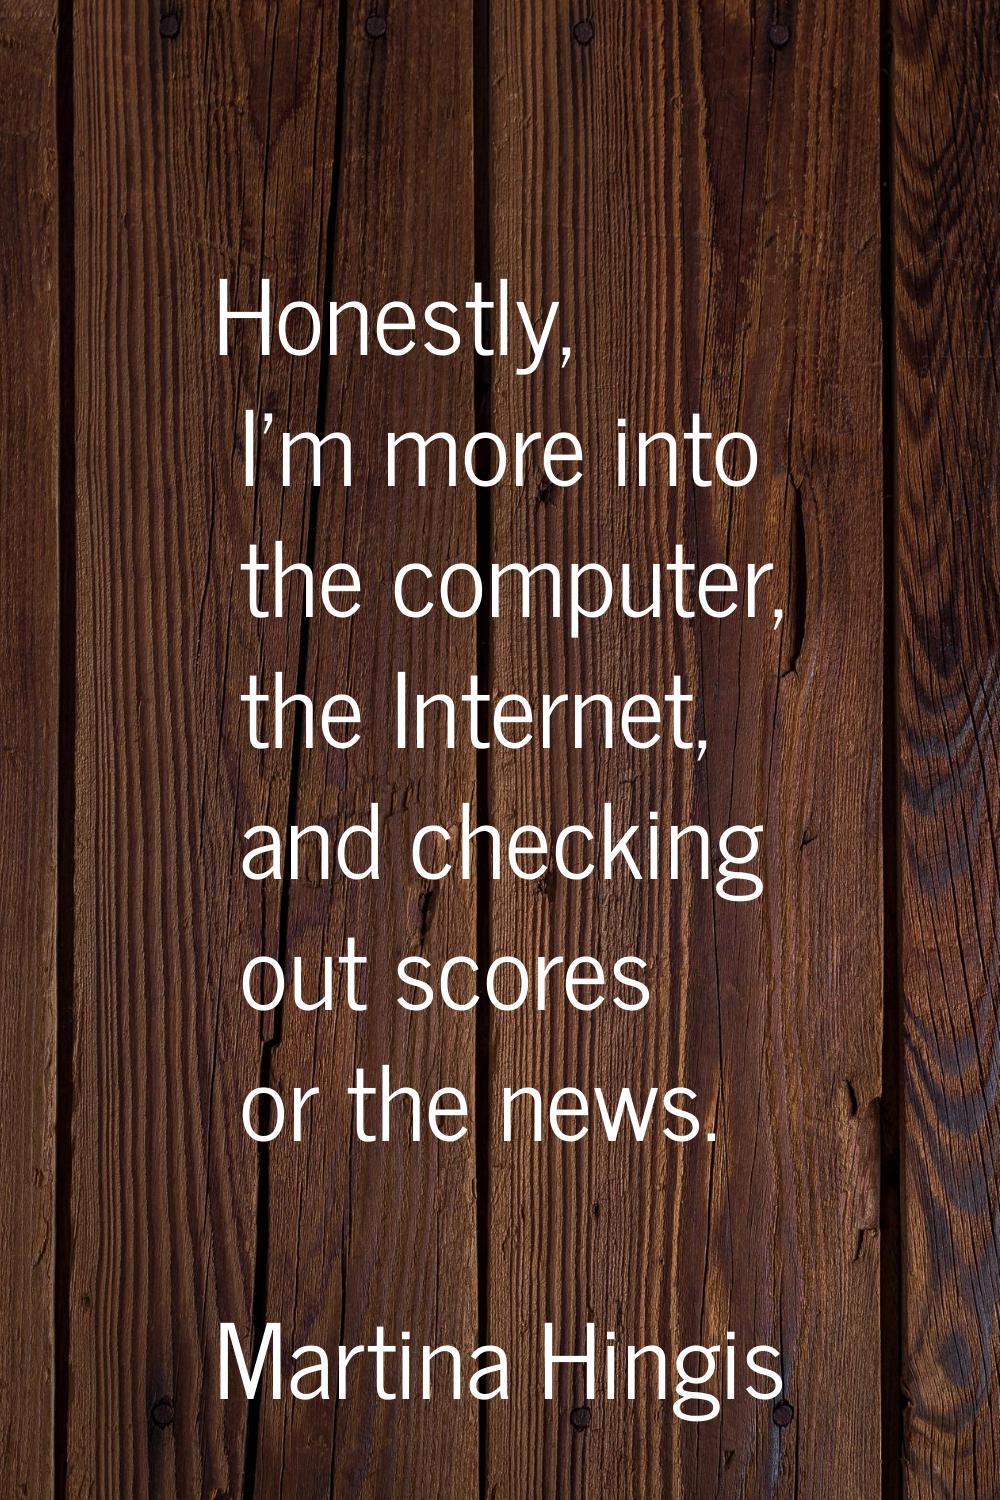 Honestly, I'm more into the computer, the Internet, and checking out scores or the news.